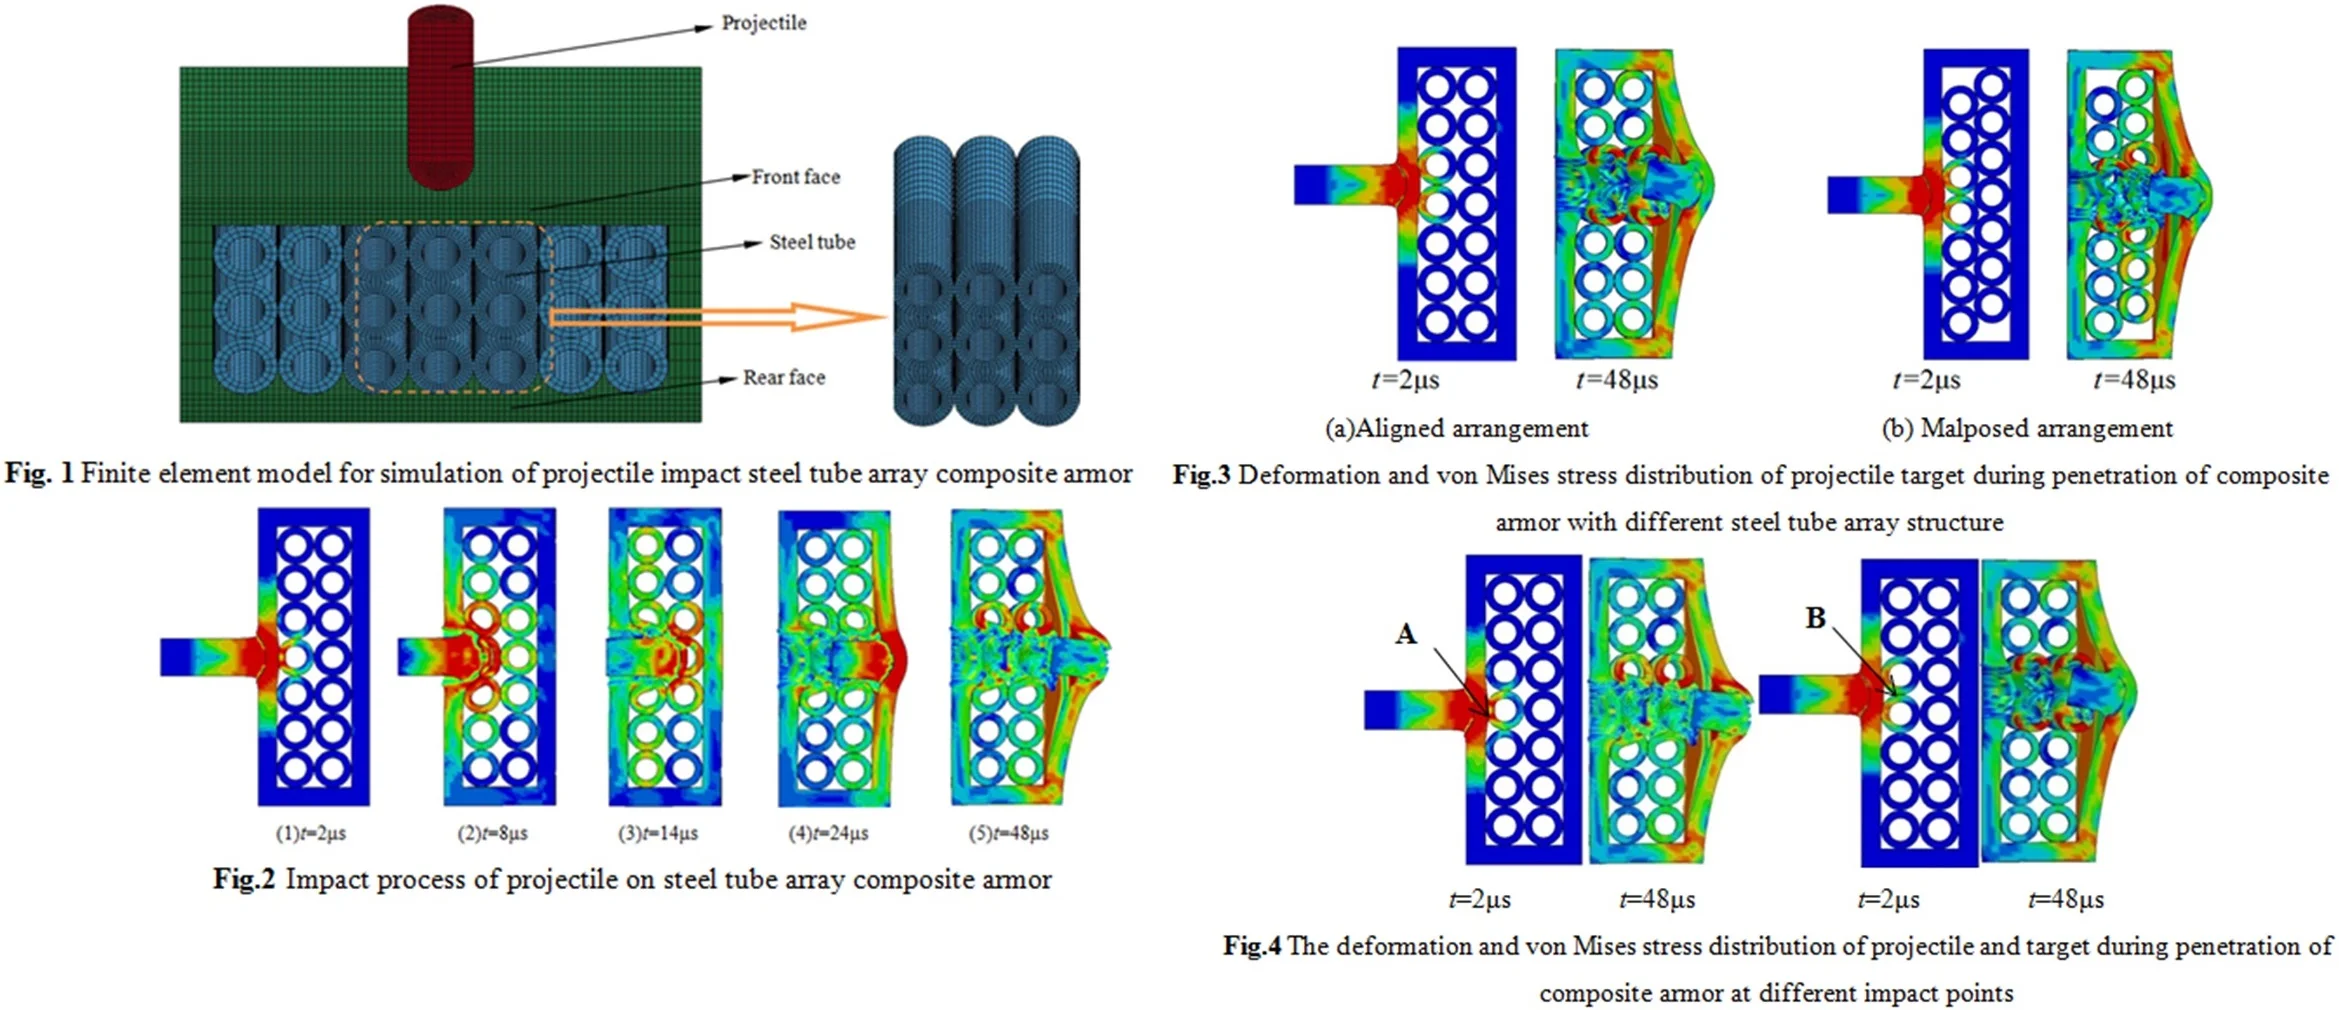 Numerical simulation of steel tube array composite armor structure against rod projectile penetration